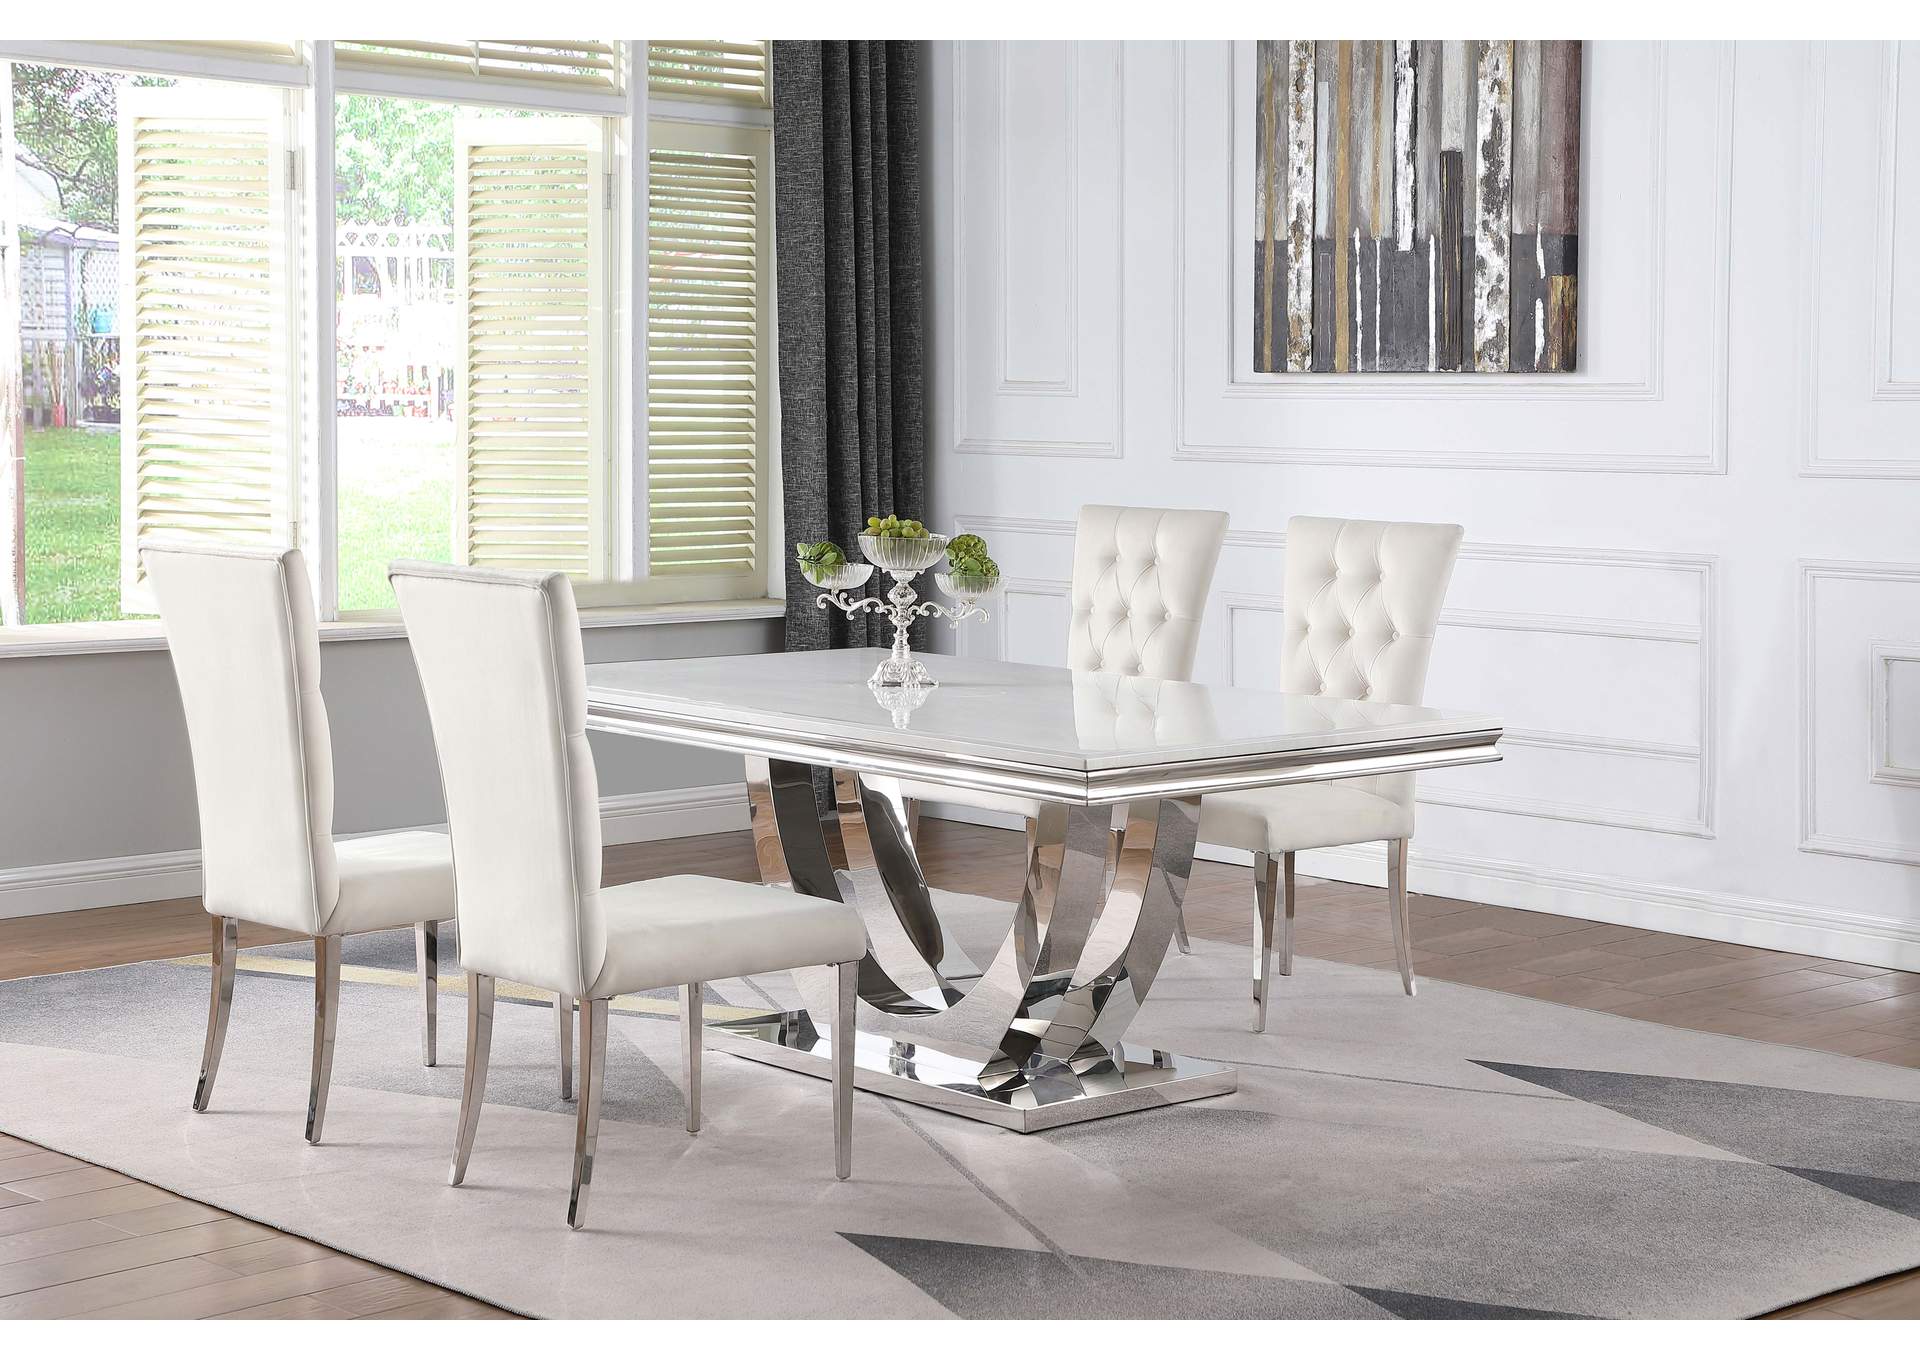 Kerwin 5-piece Dining Room Set White and Chrome,Coaster Furniture